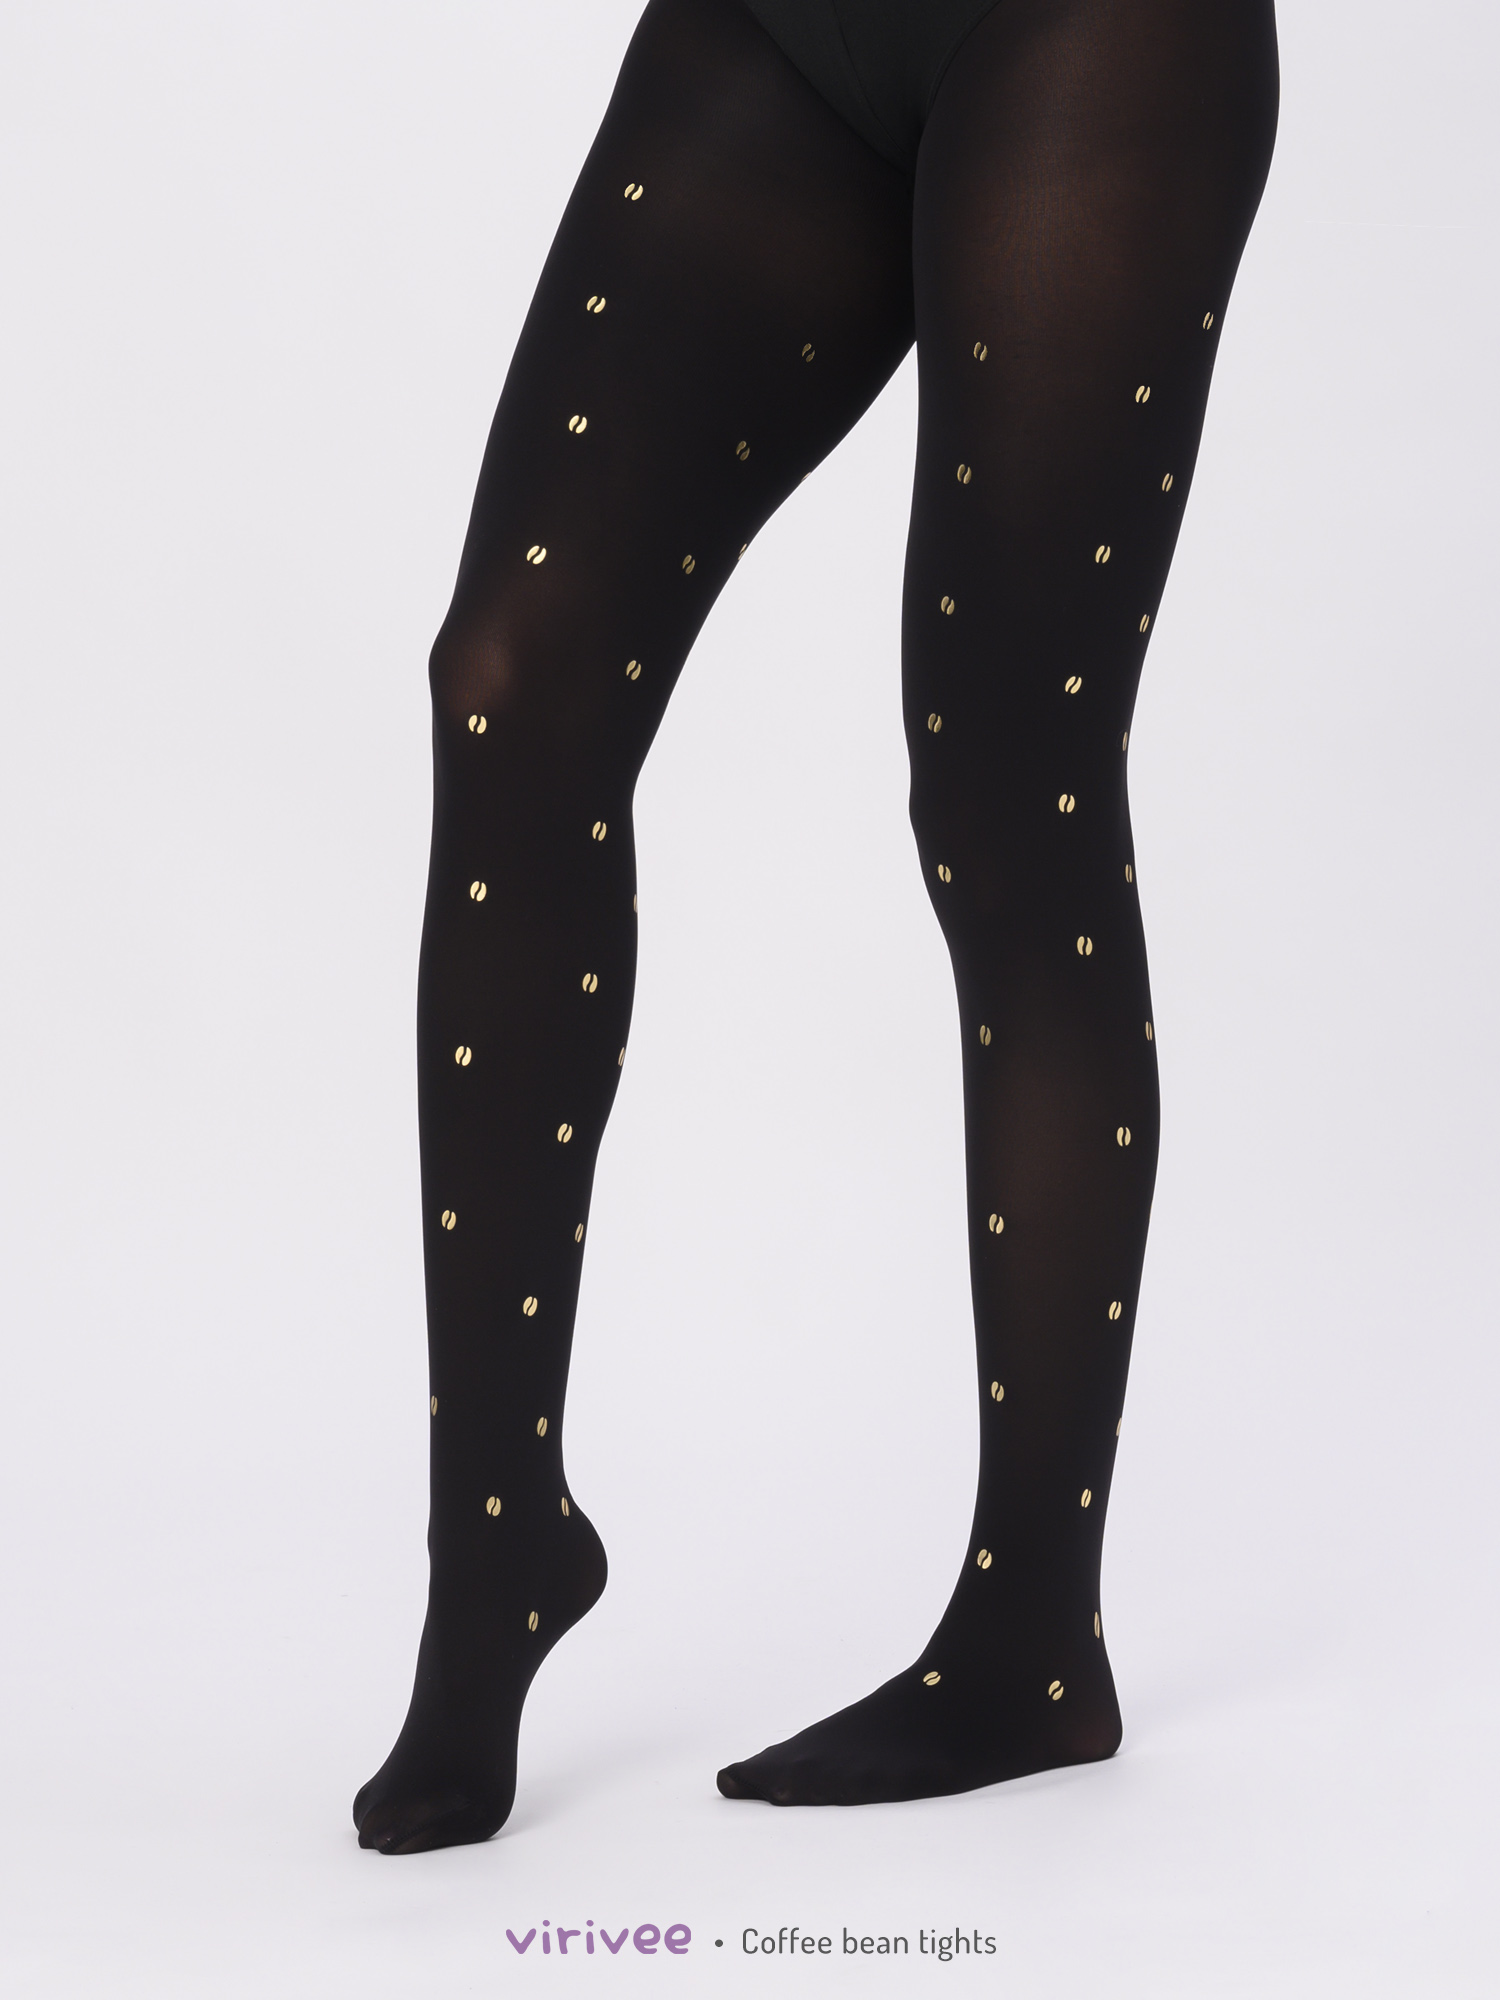 Coffee bean patterned tights, coffee lovers gift